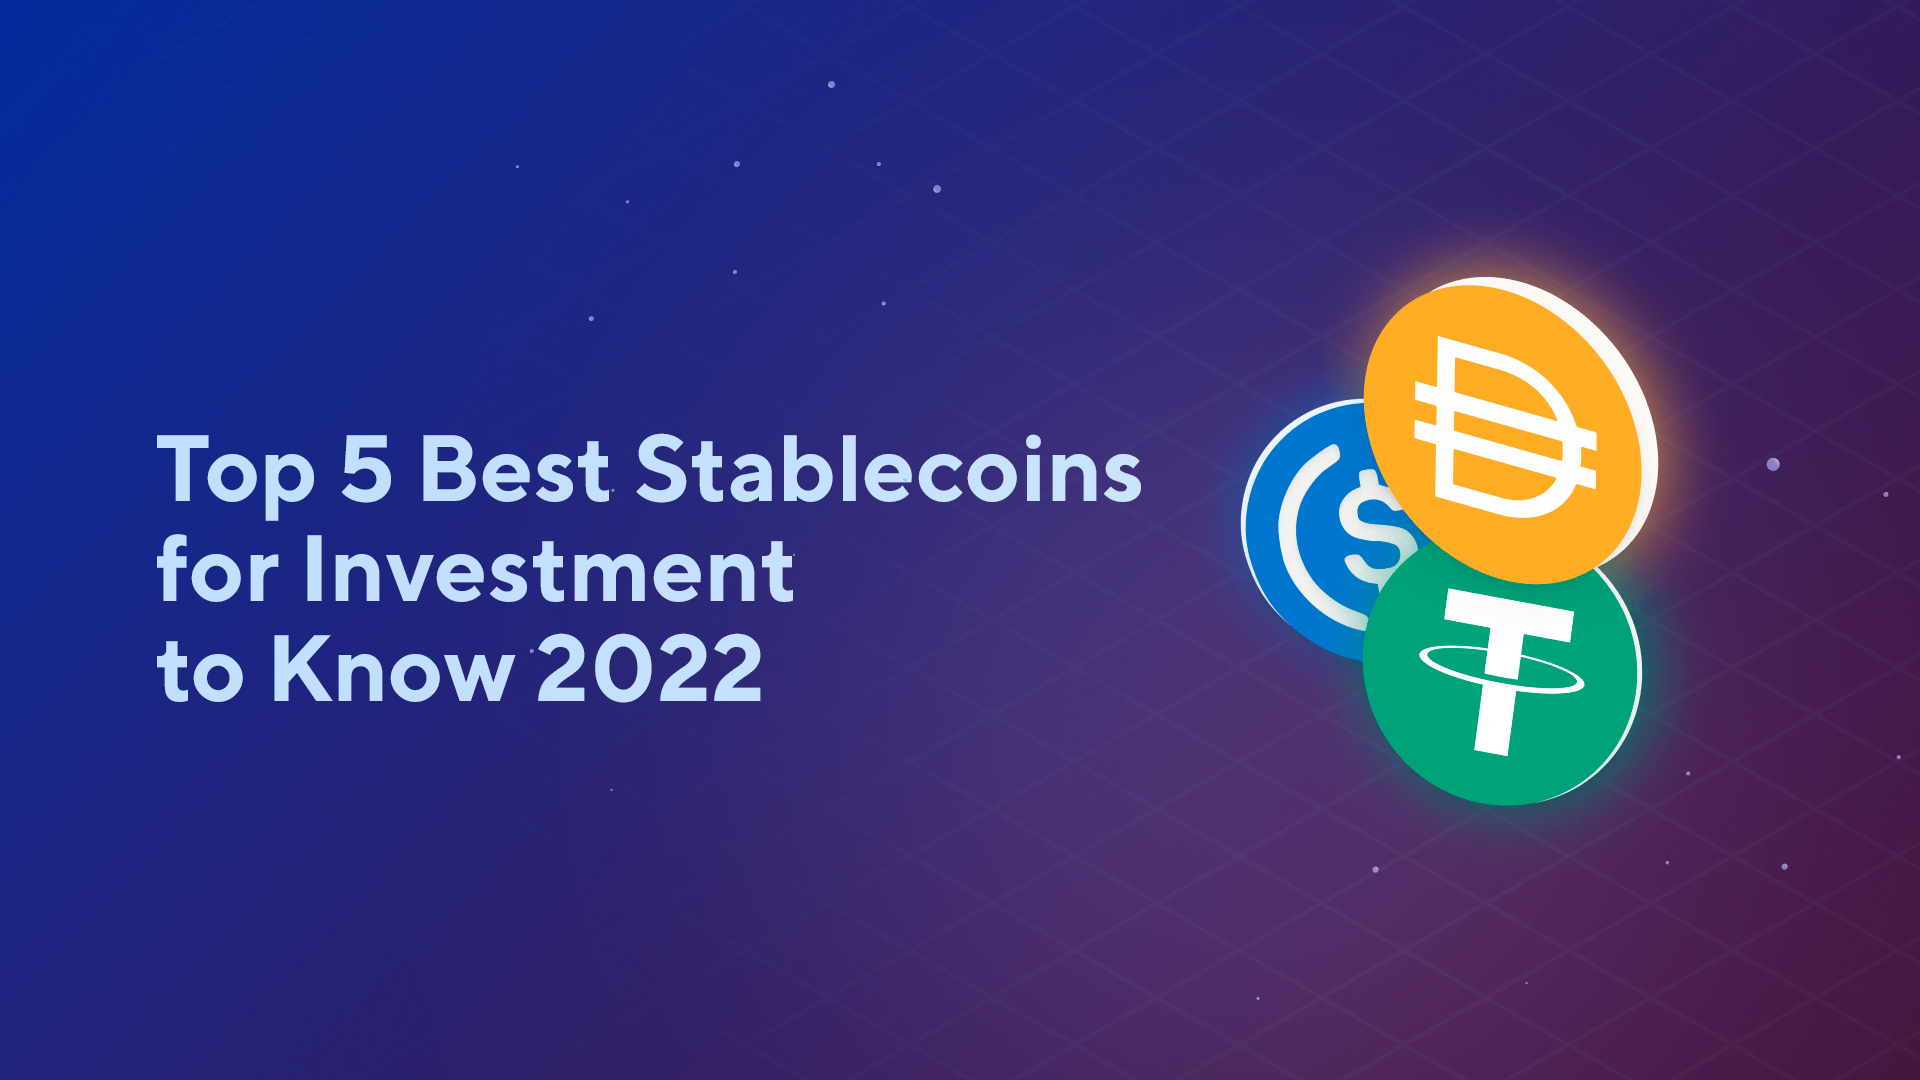 Top 5 Best Stablecoins for Investment to Know 2022